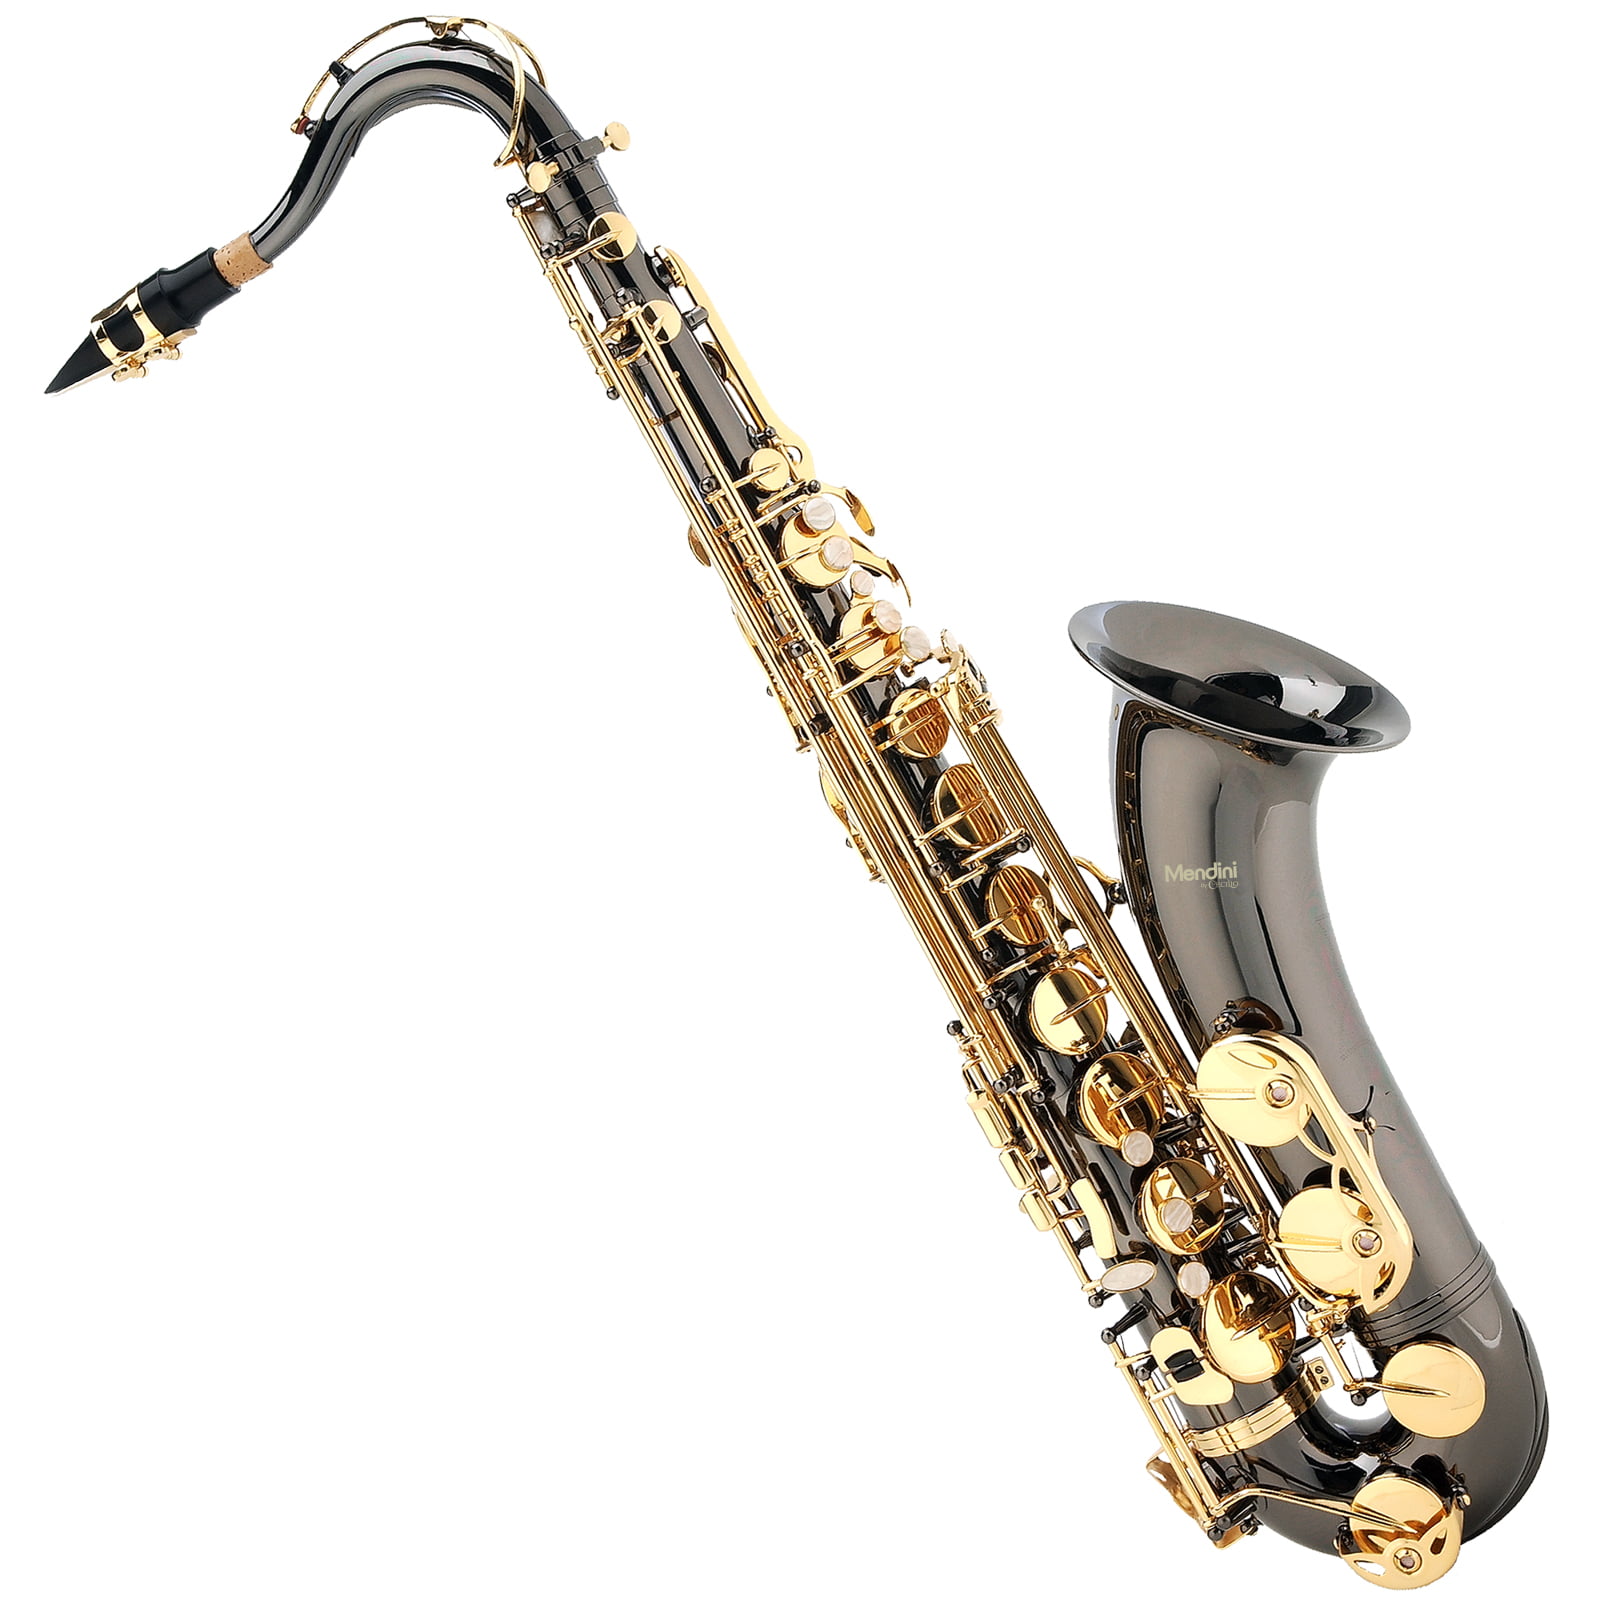 5 Anches Saxophone Ténor Marca american vintage force 2.5